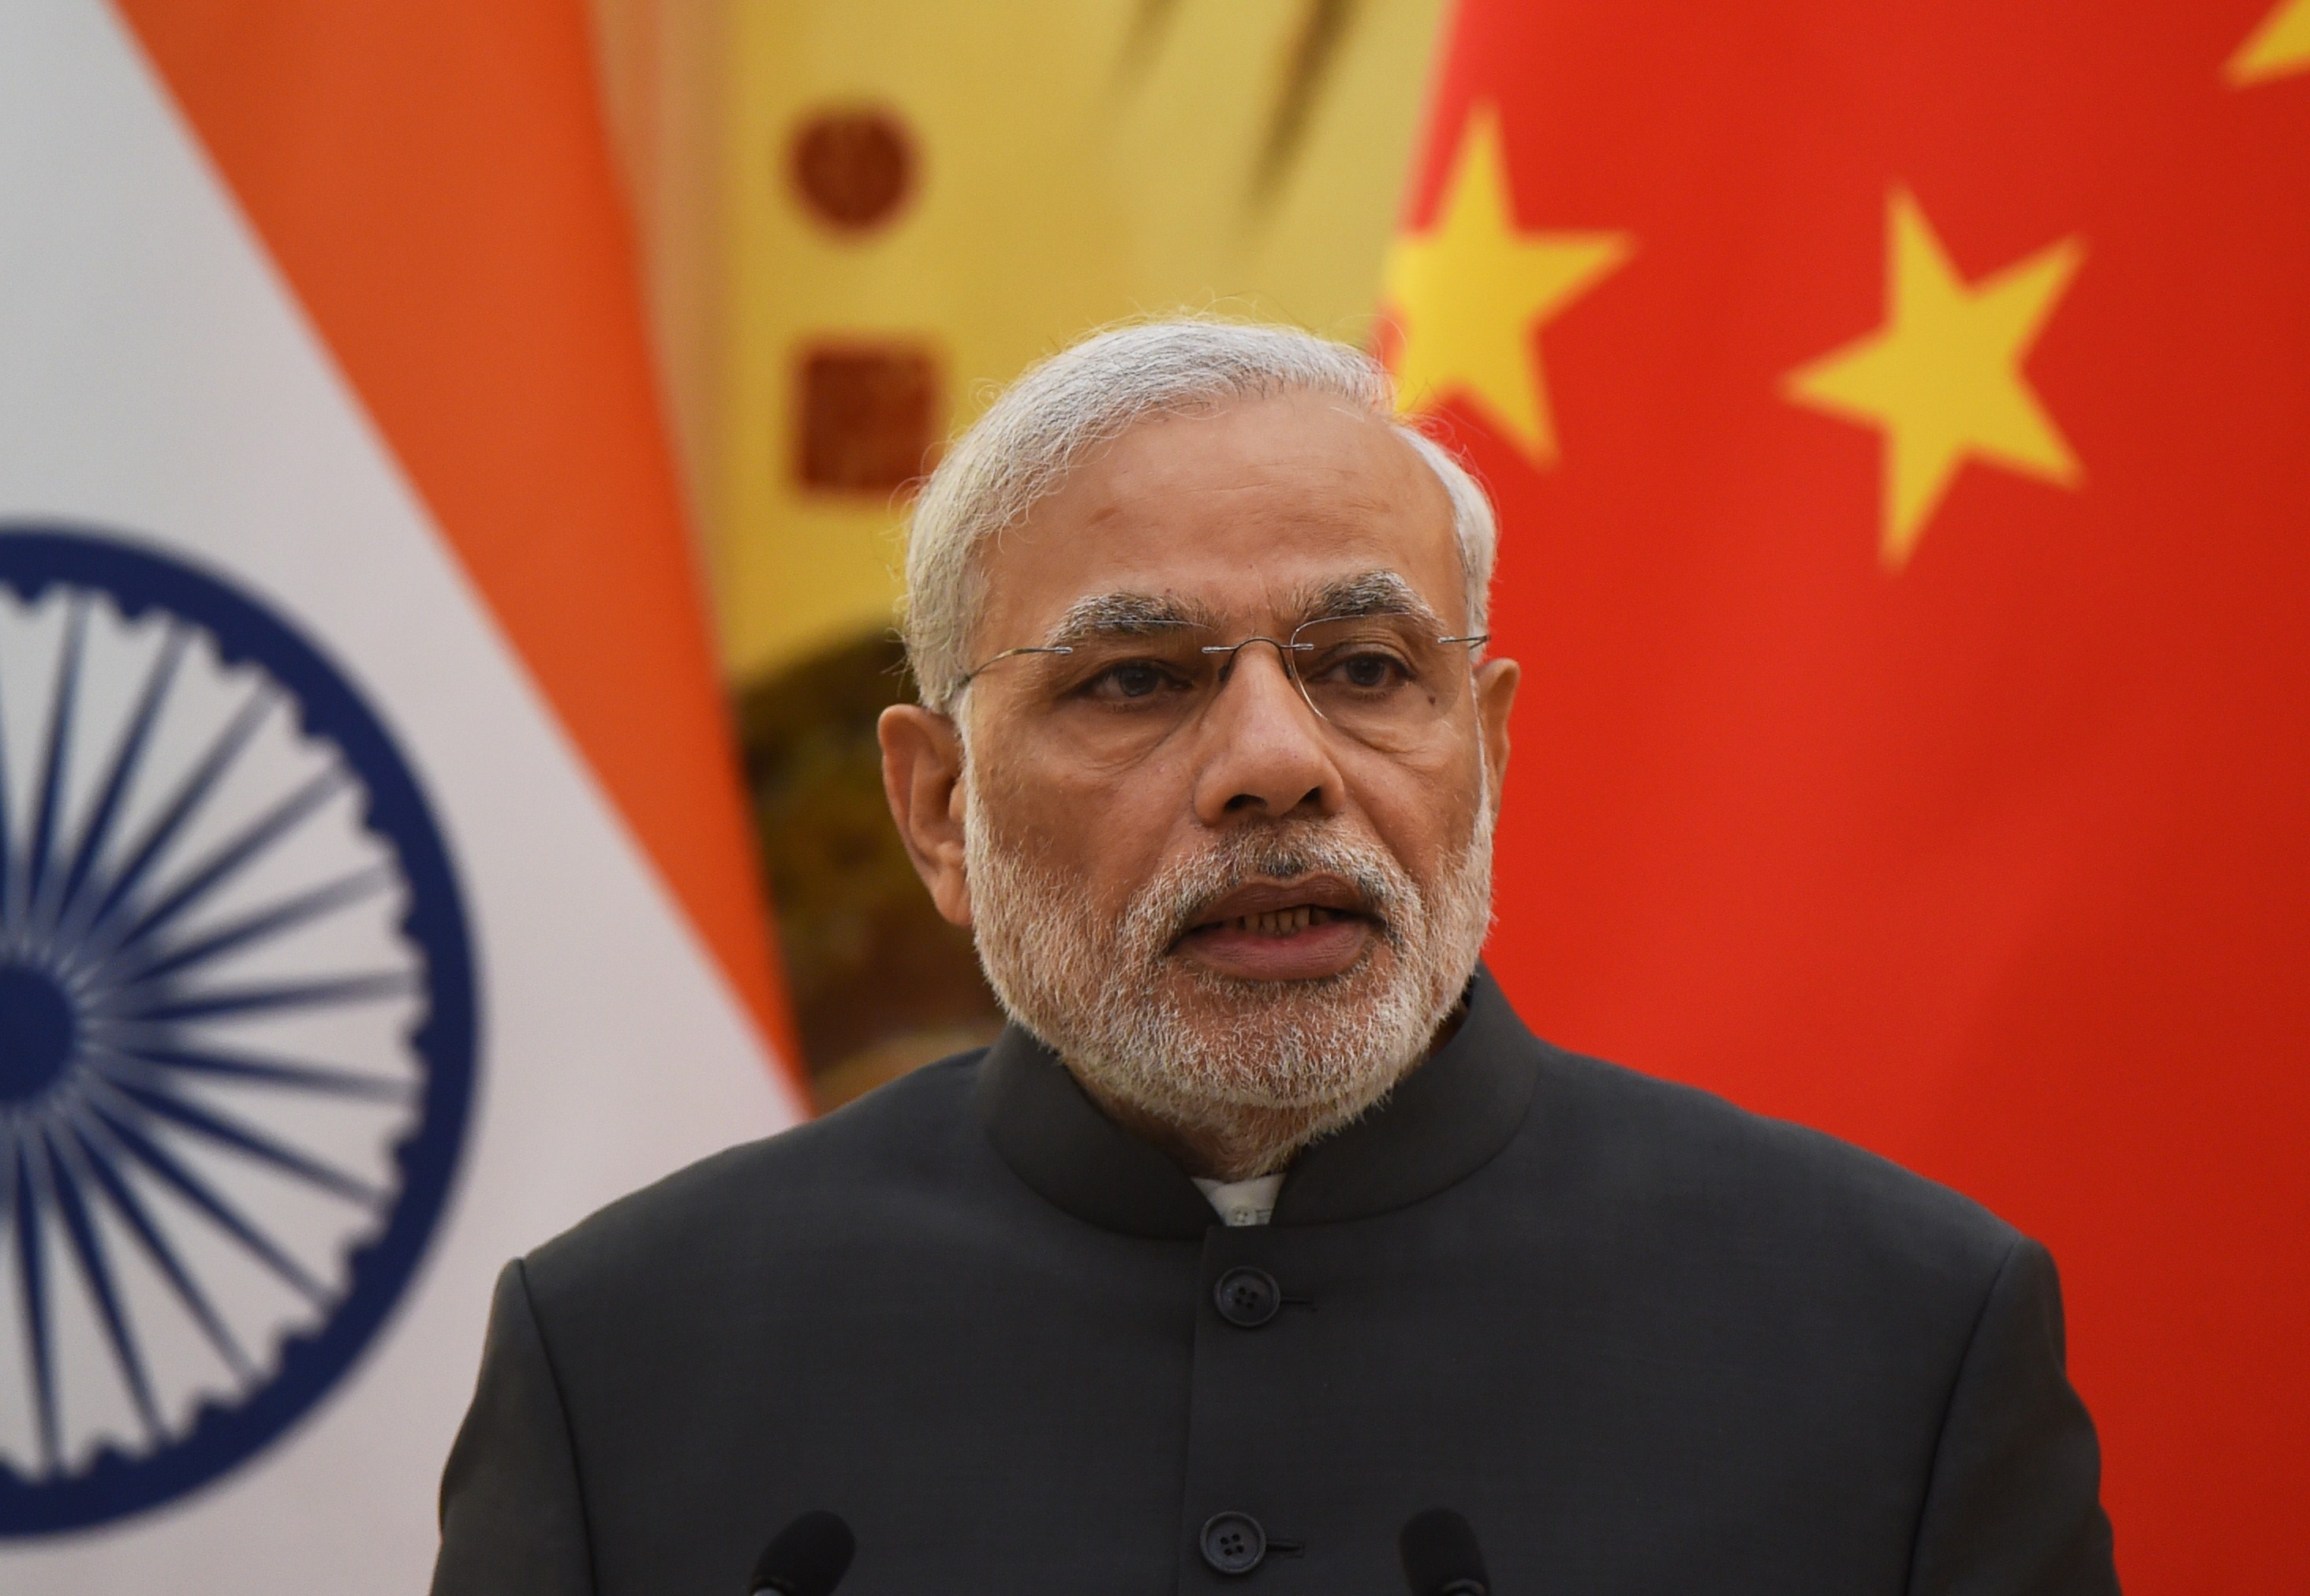 India's Prime Minister Narendra Modi speaks at a joint press conference with Chinese Premier Li Keqiang (not seen) in the Great Hall of the People in Beijing on May 15, 2015 (GREG BAKER—AFP/Getty Images)